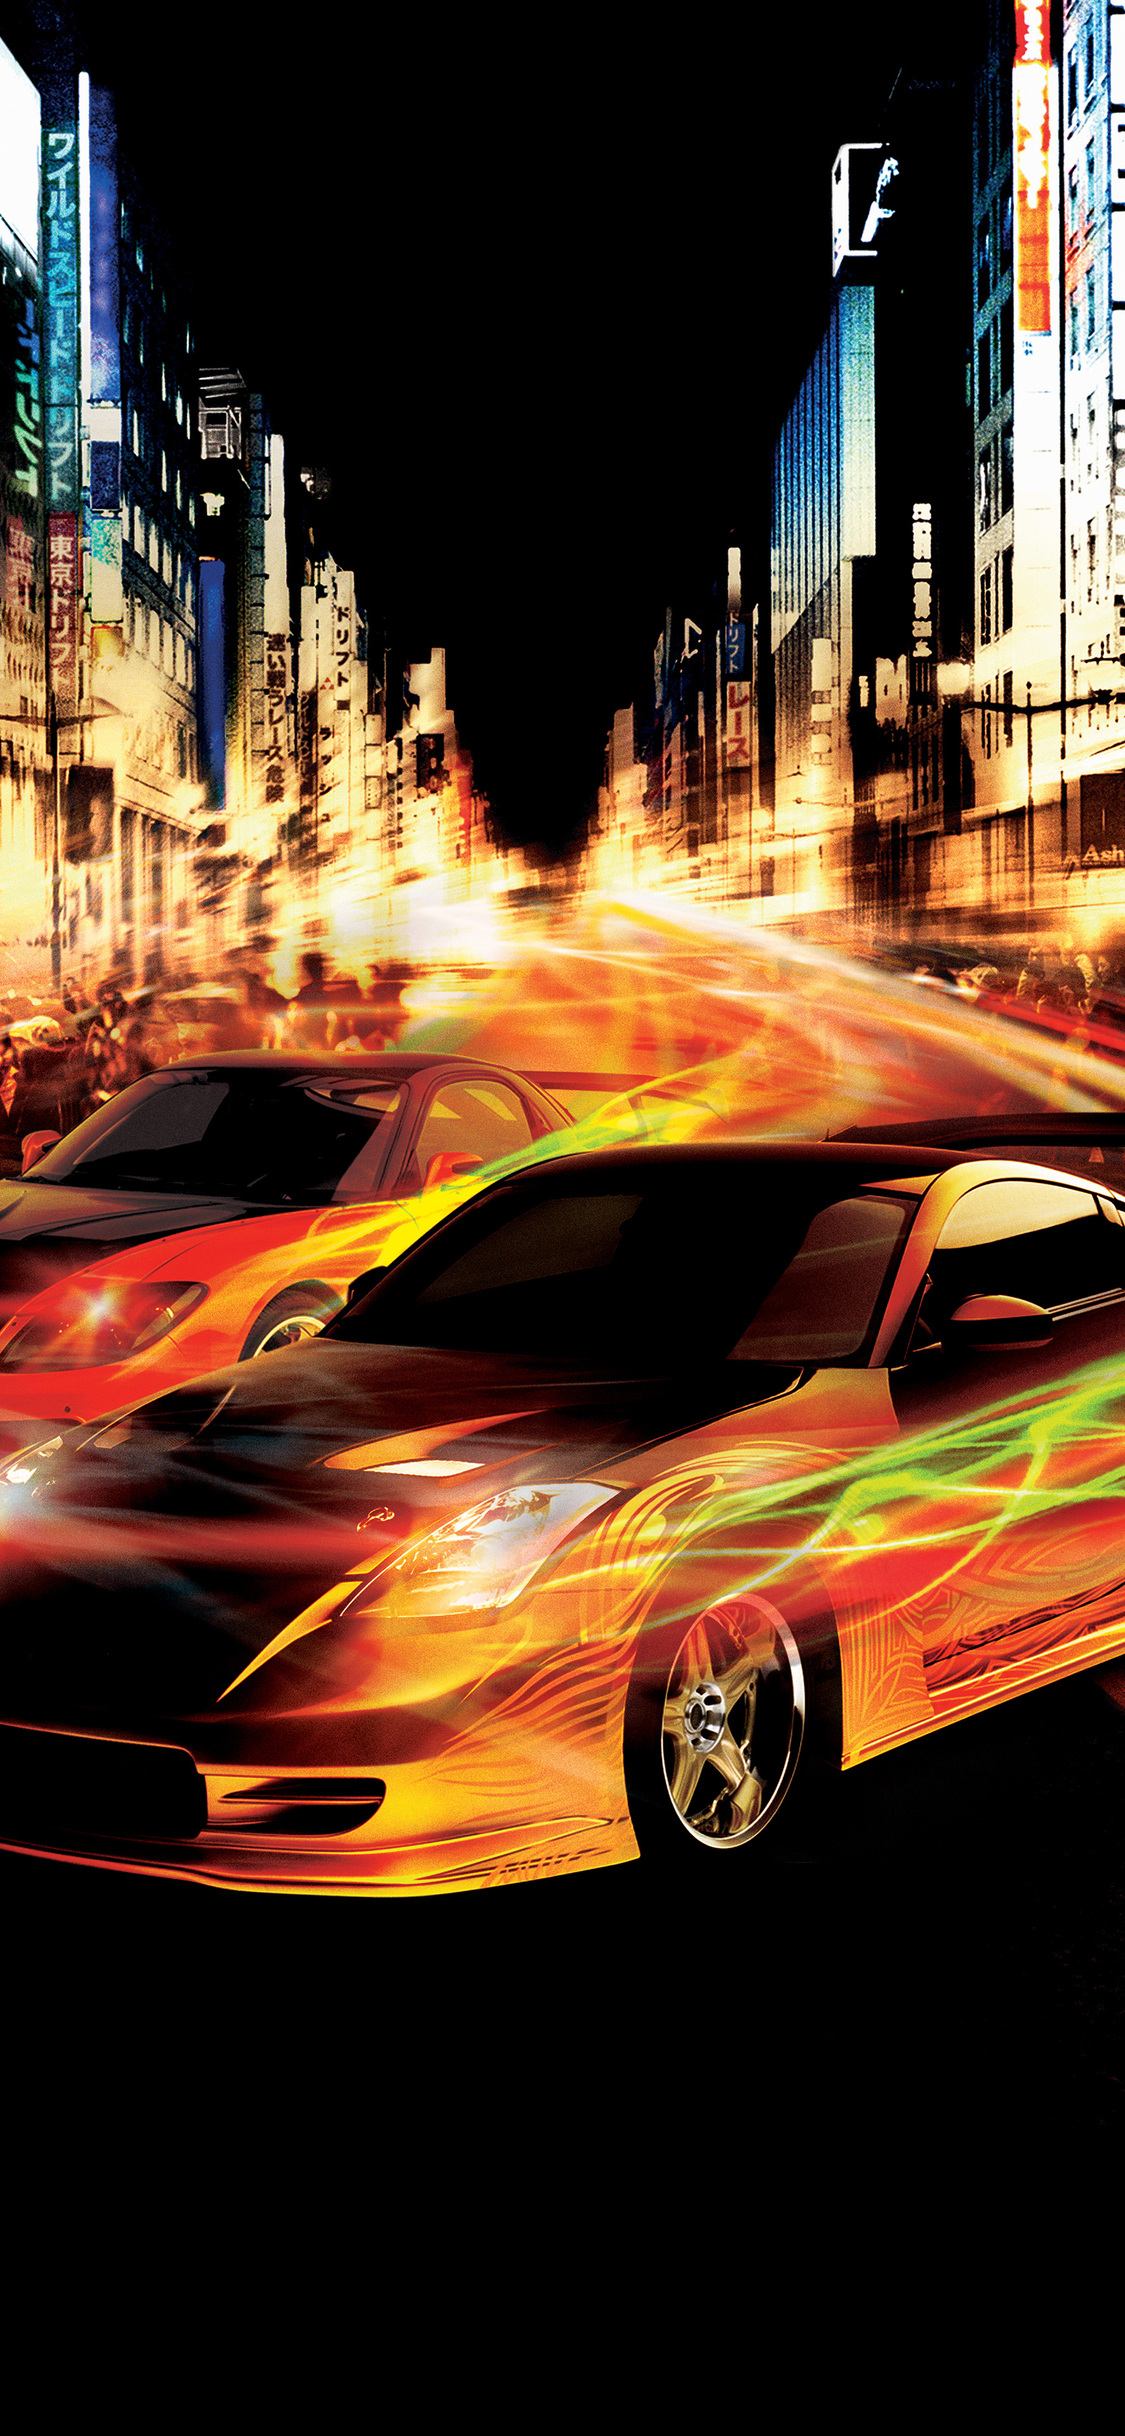 1125x2436-fast-and-the-furious-tokyo-drift-4k-iphone-xs-iphone-10